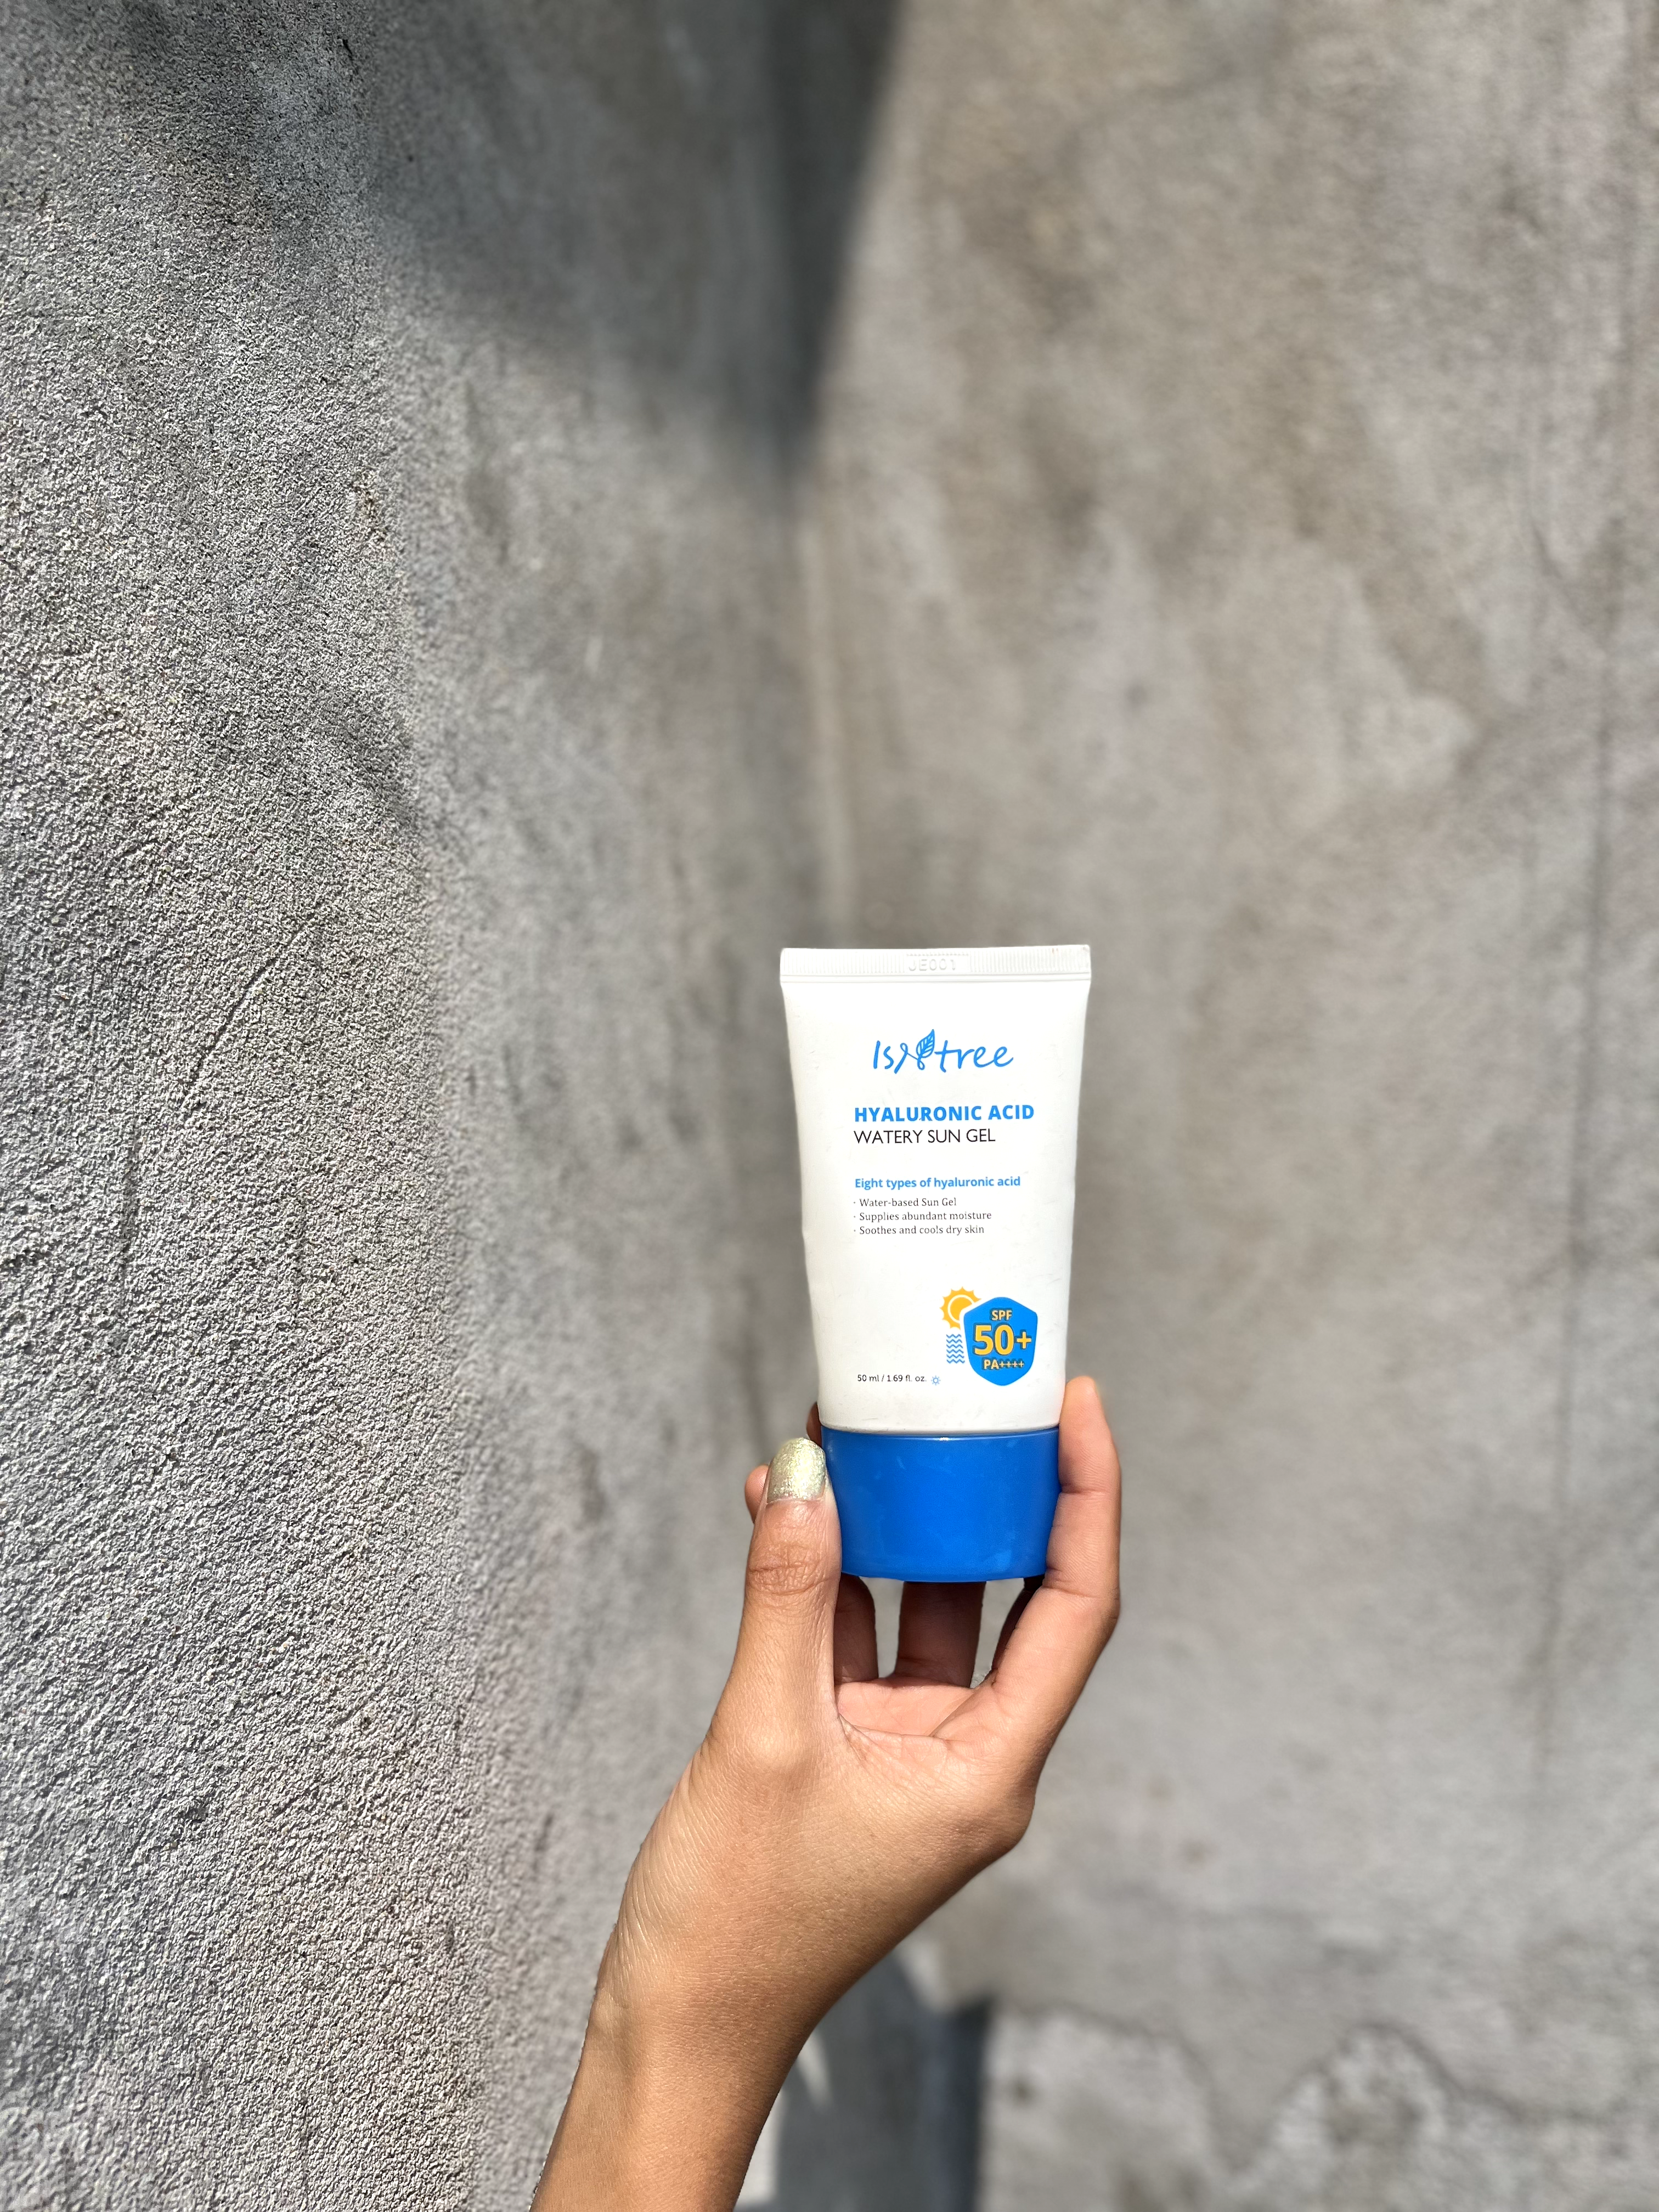 One of the Isntree Hyaluronic Acid Sunscreens : Watery Sun Gel